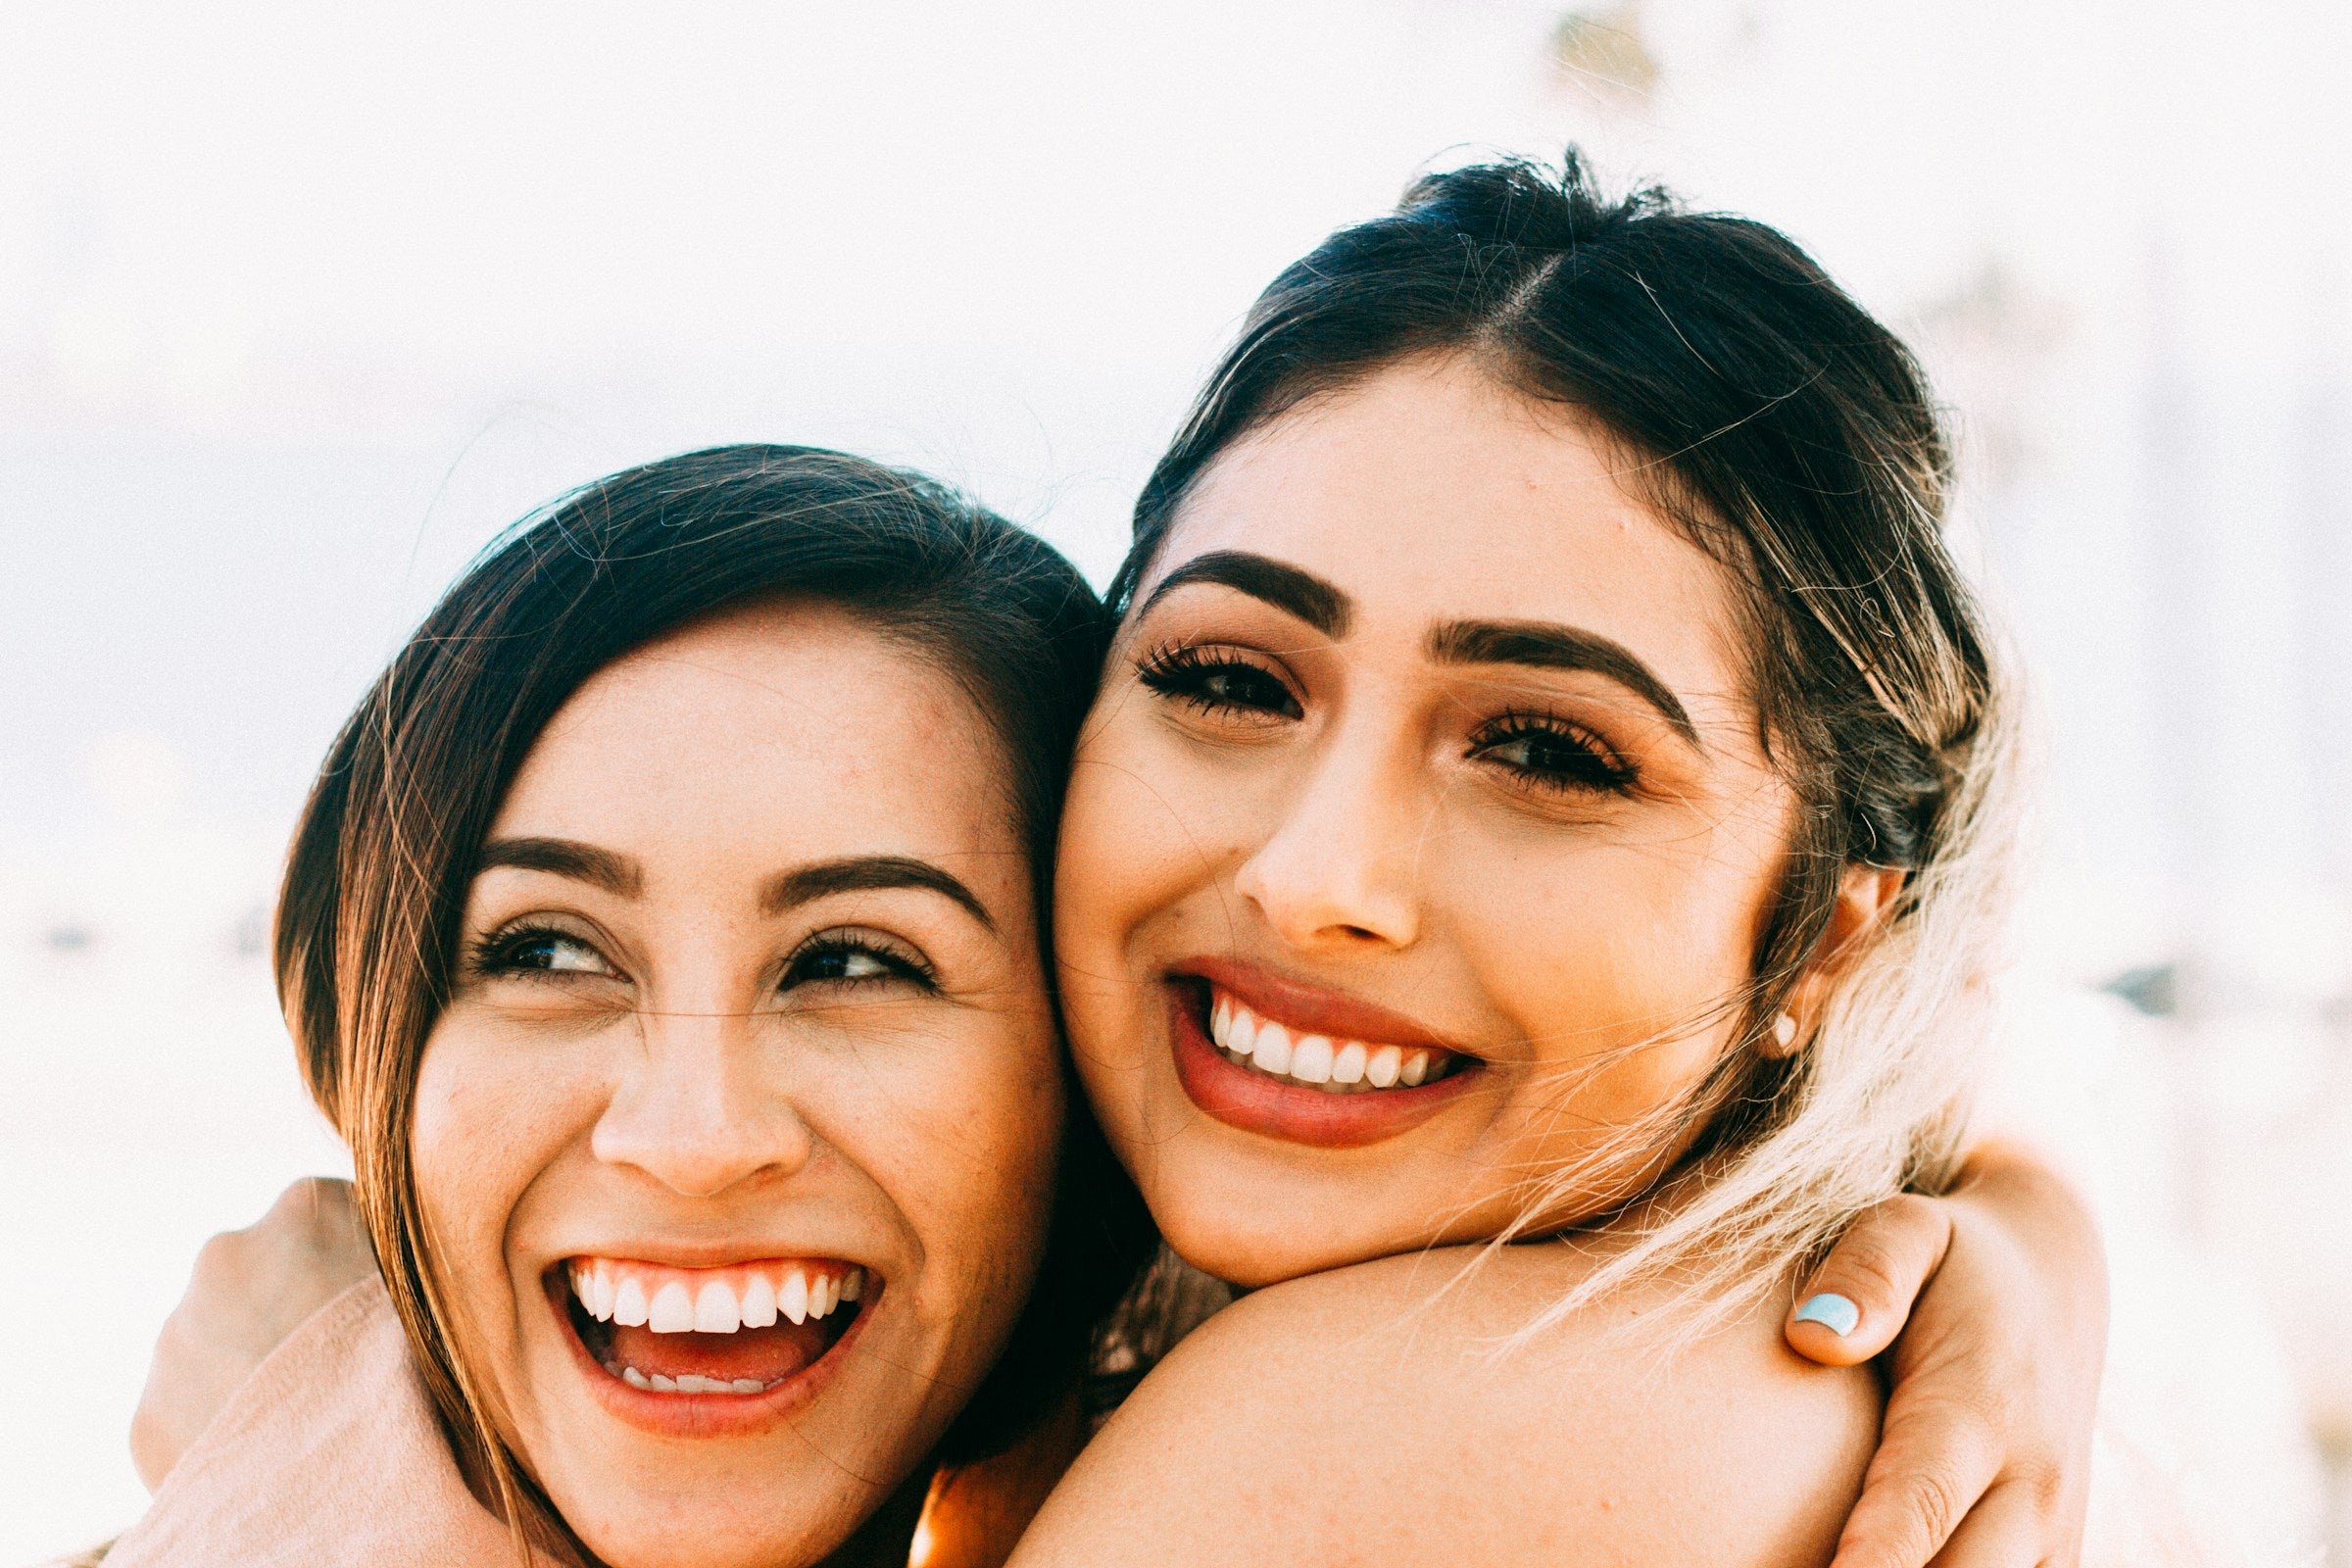 Two happy women embracing in a hug